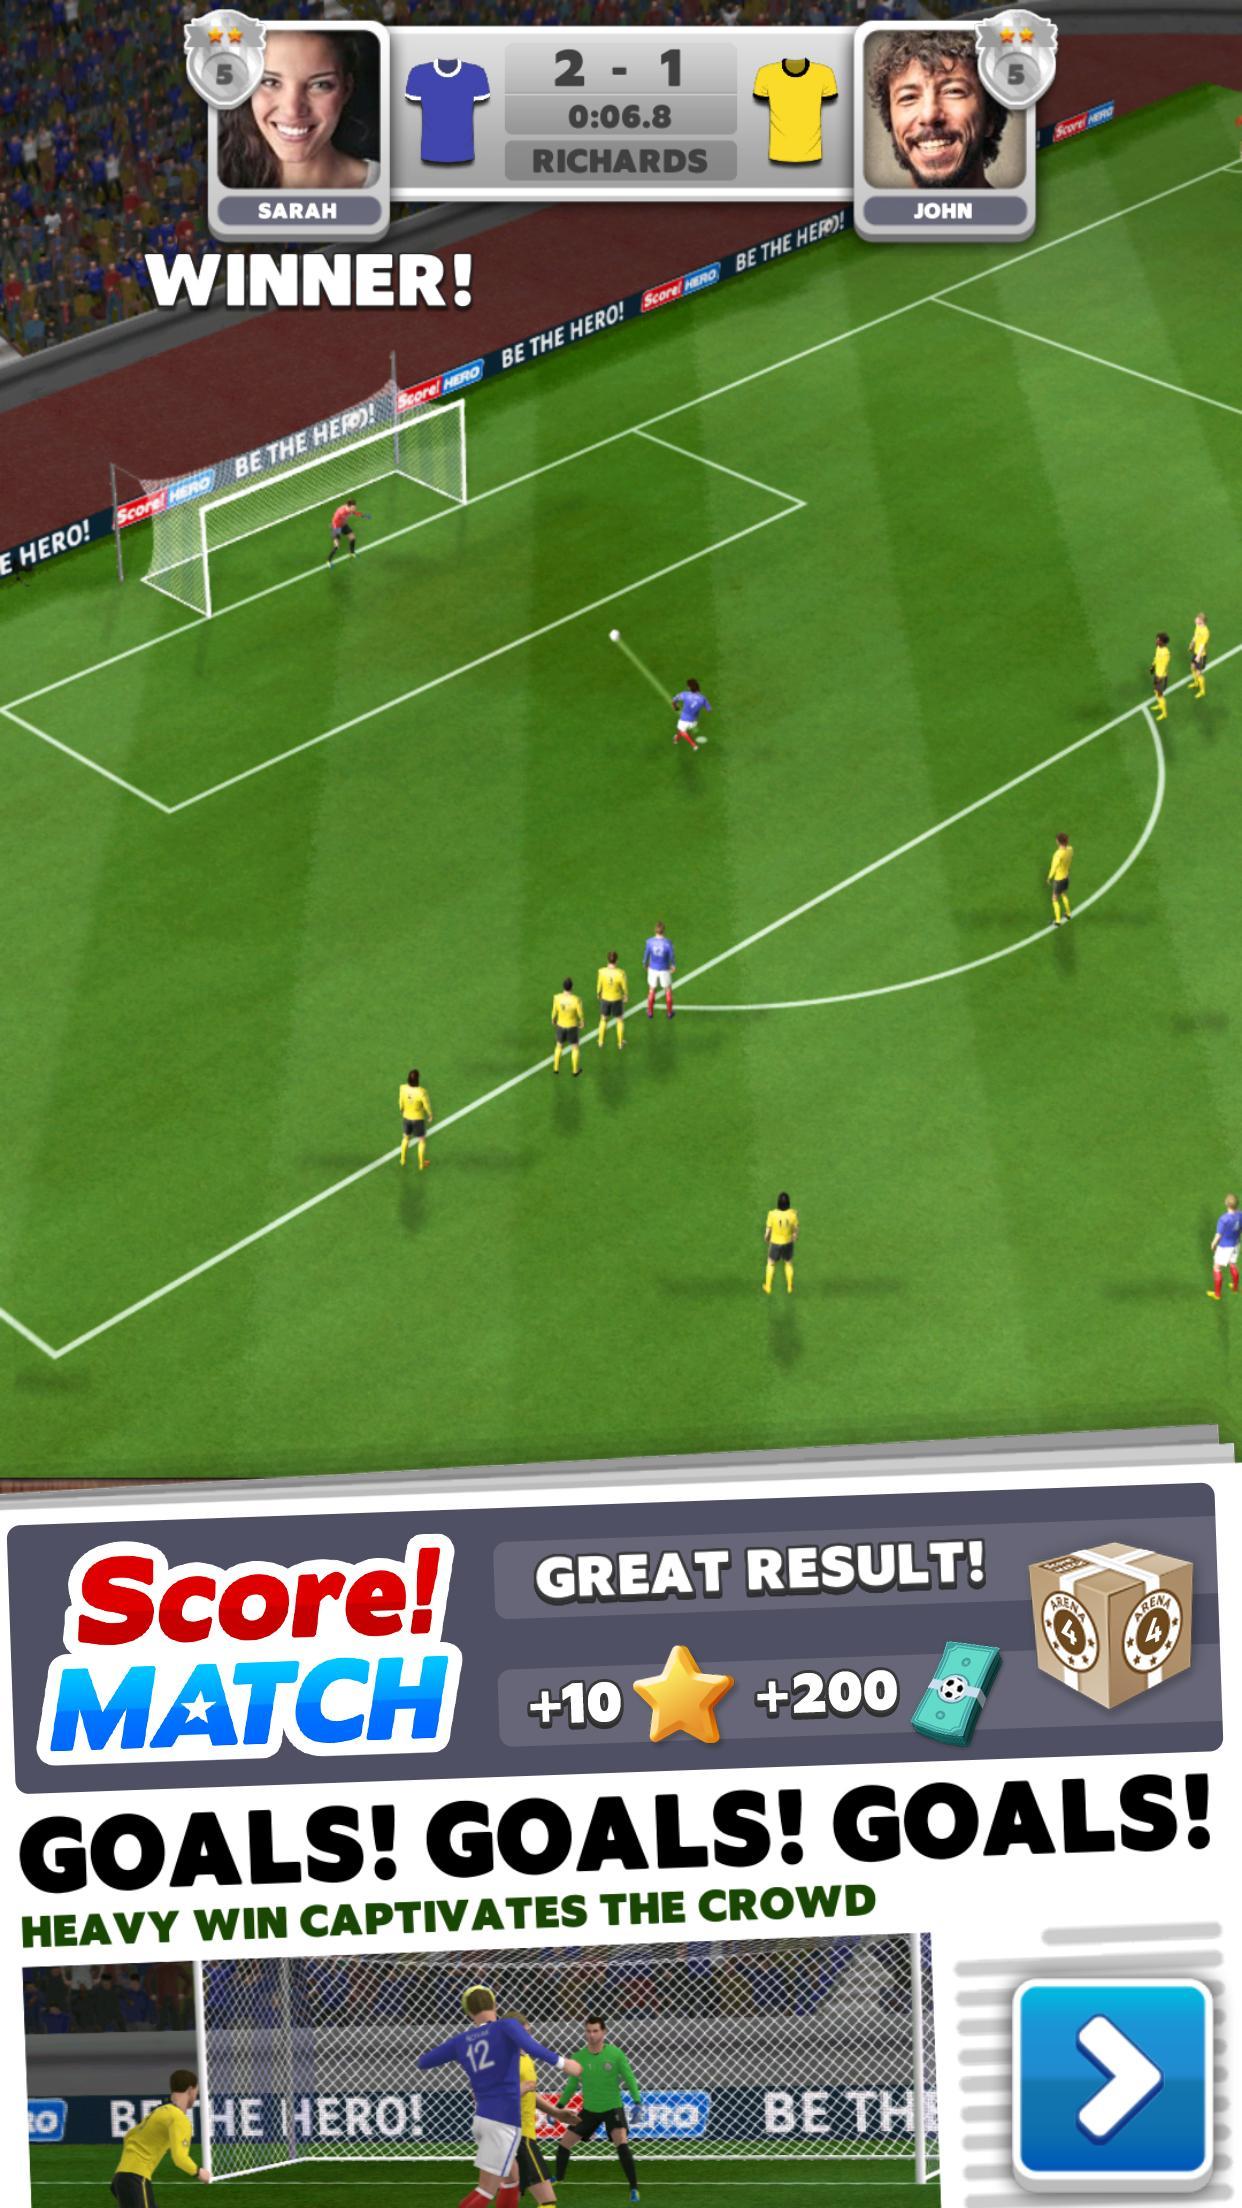 Score! Match for Android - APK Download